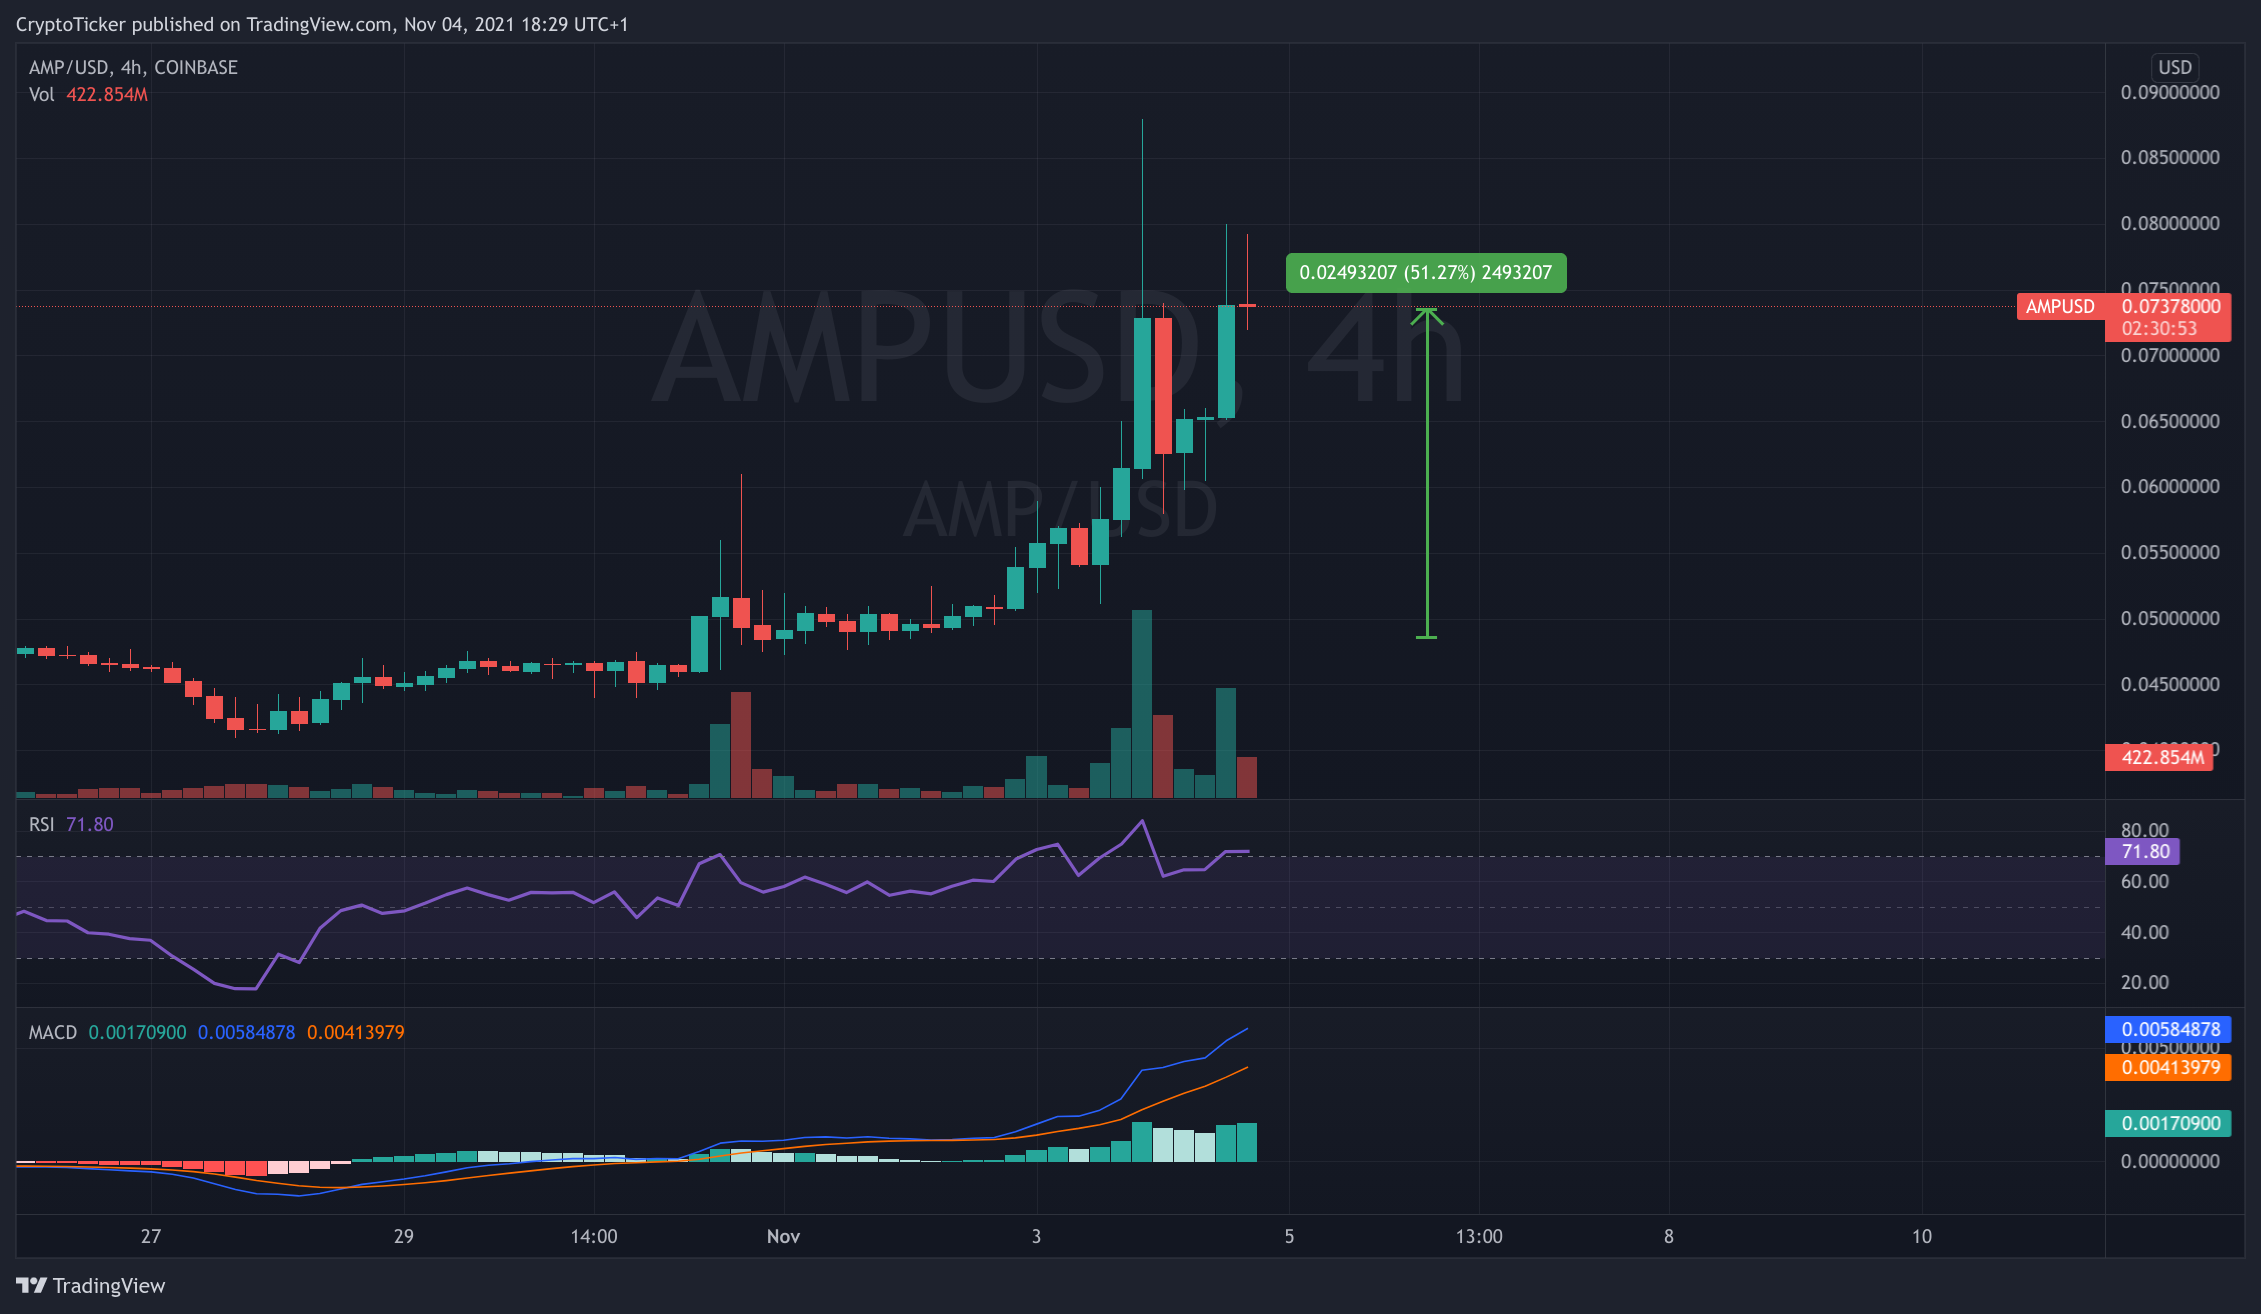 AMP/USD 4-hours chart showing AMP's rise 